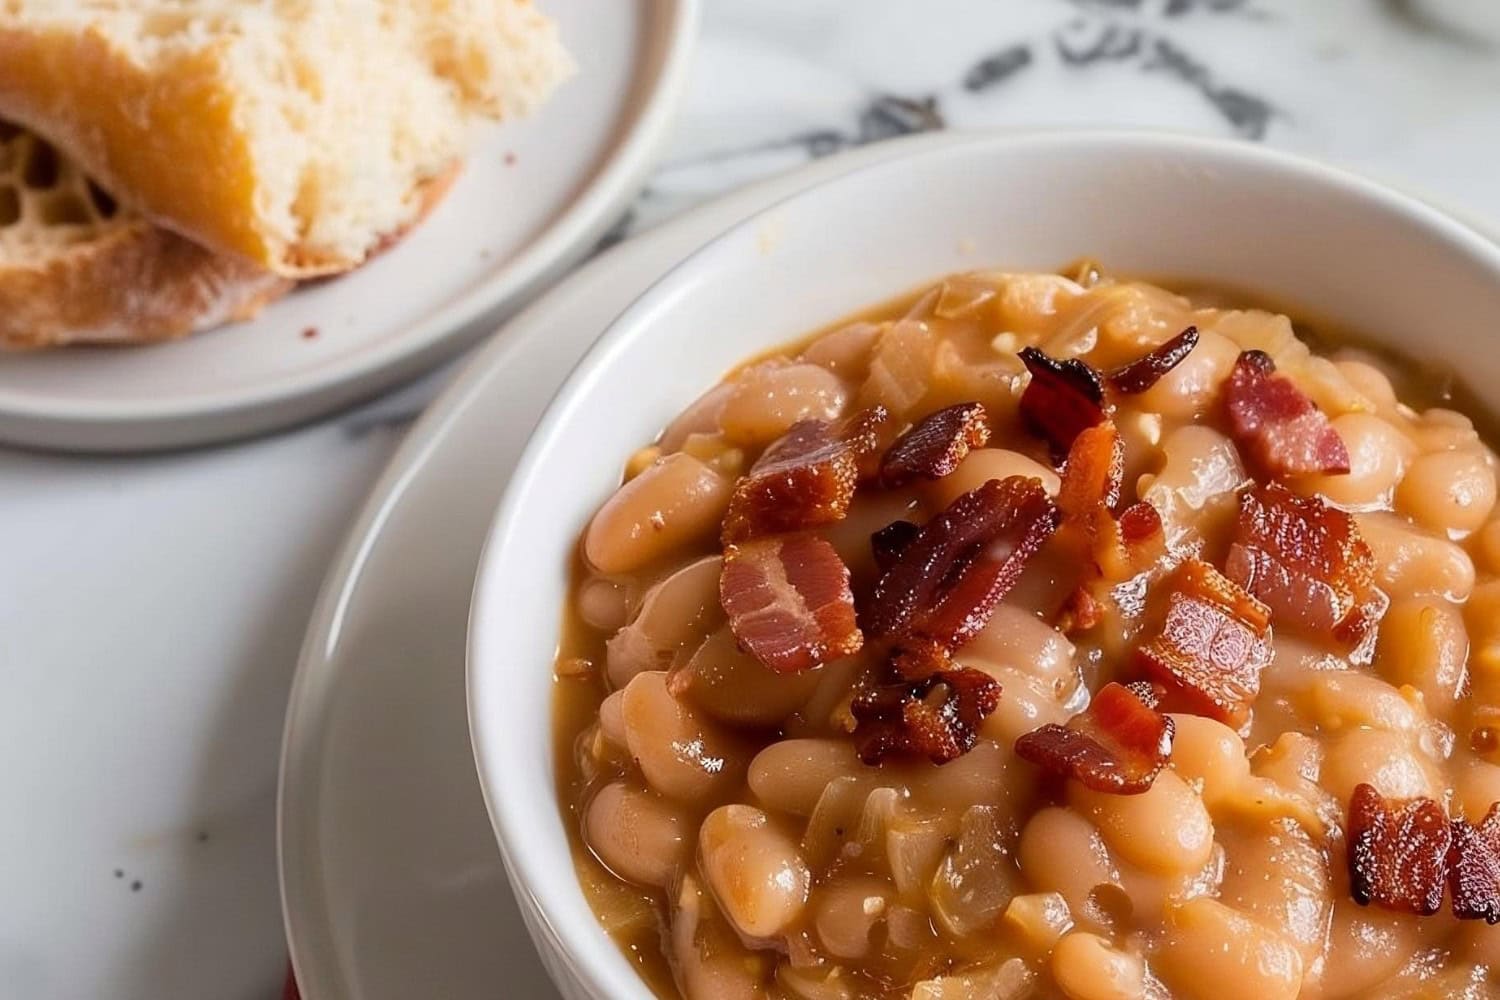 Bowl of Grandma Brown's Baked Beans in a Bowl with Crusty Bread on a Plate to the Side